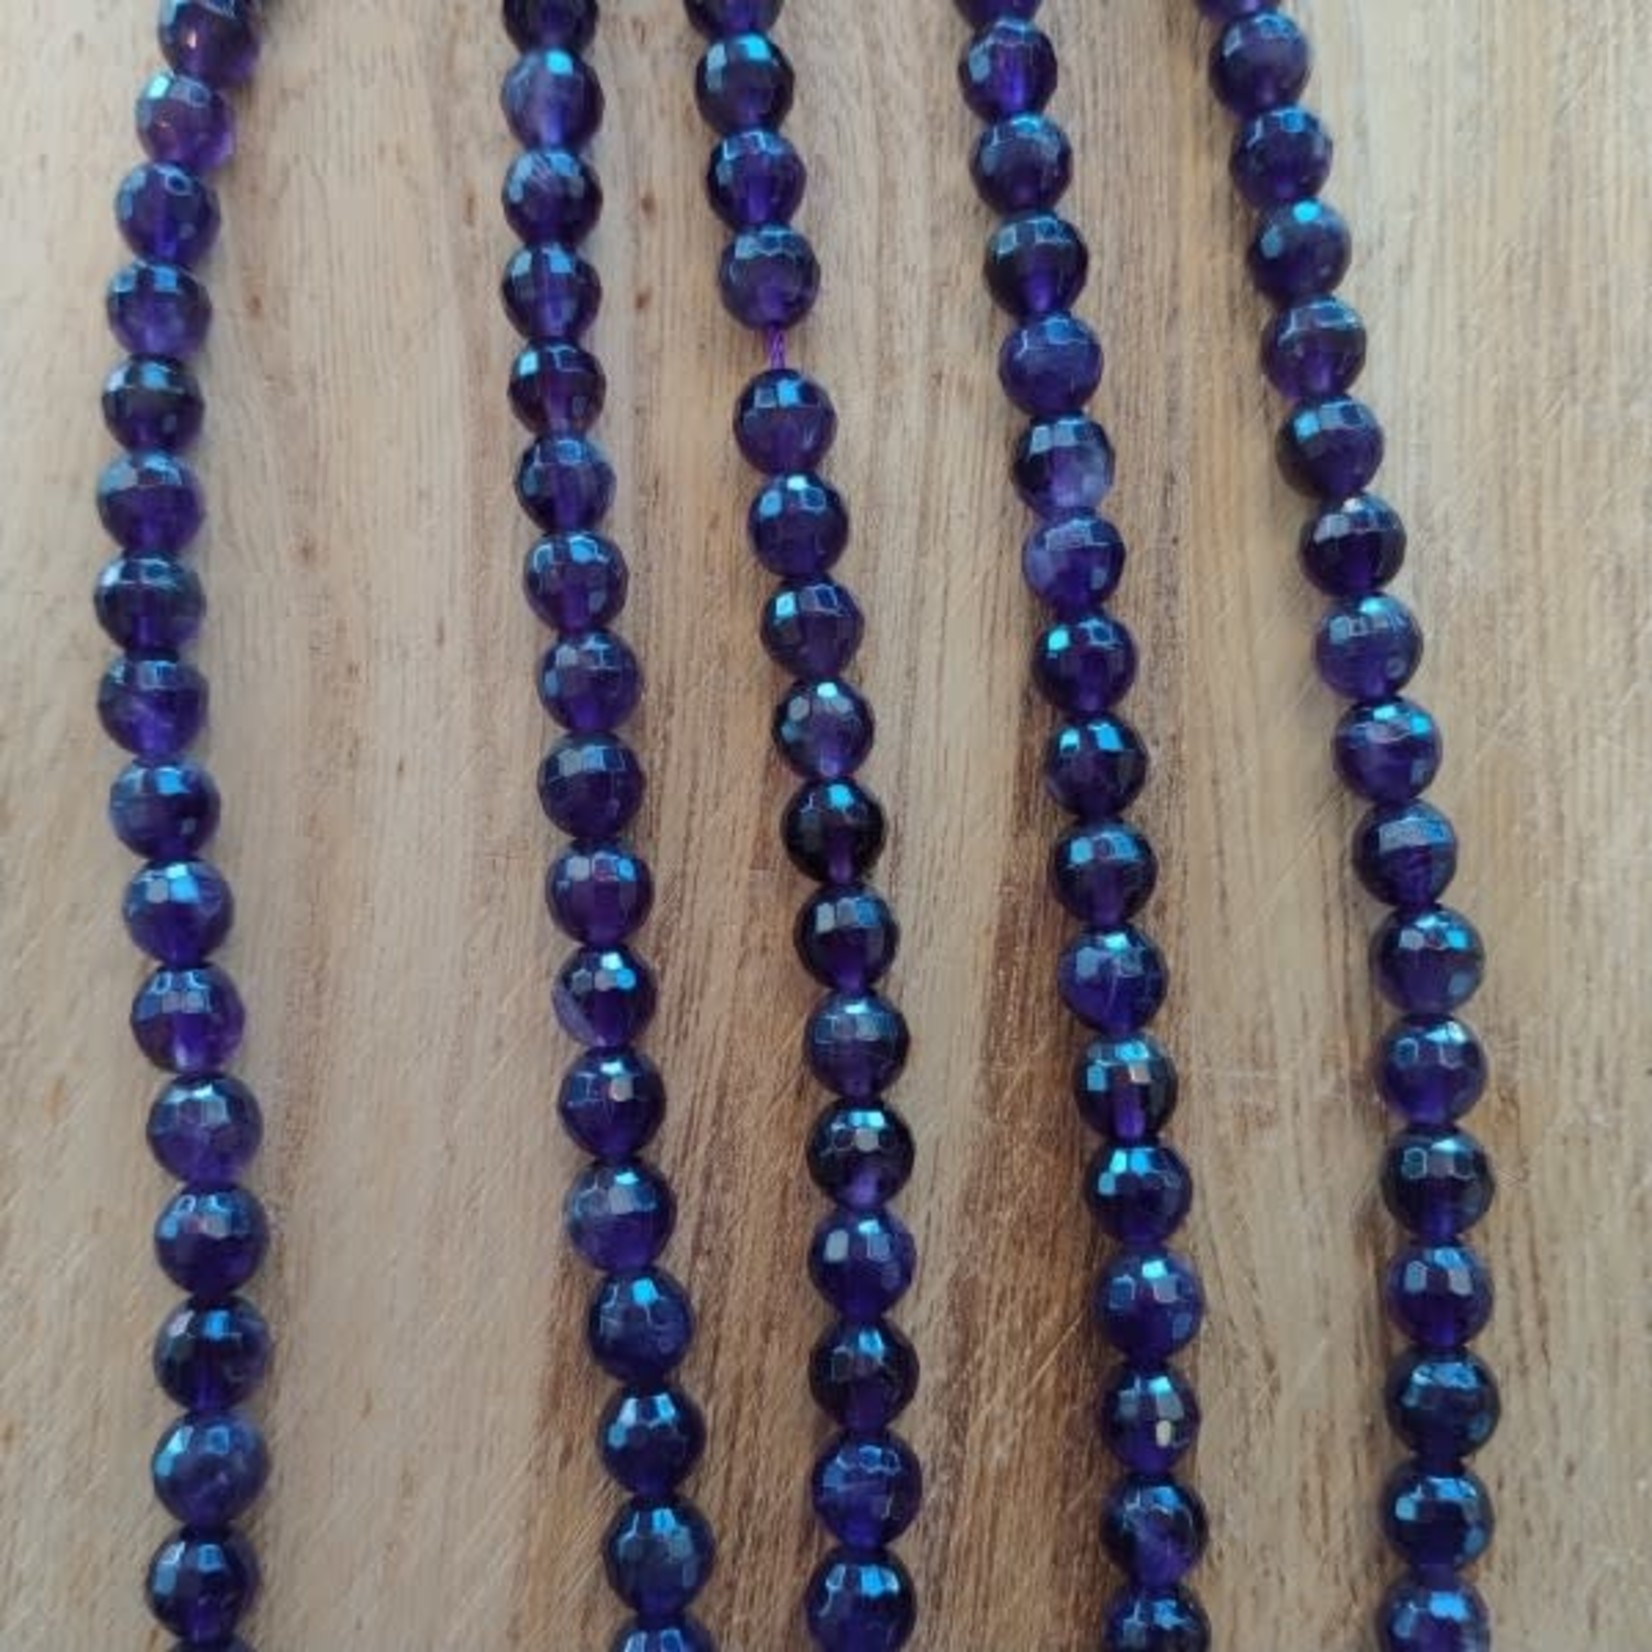 Amethyst 6mm Faceted Bead Strand